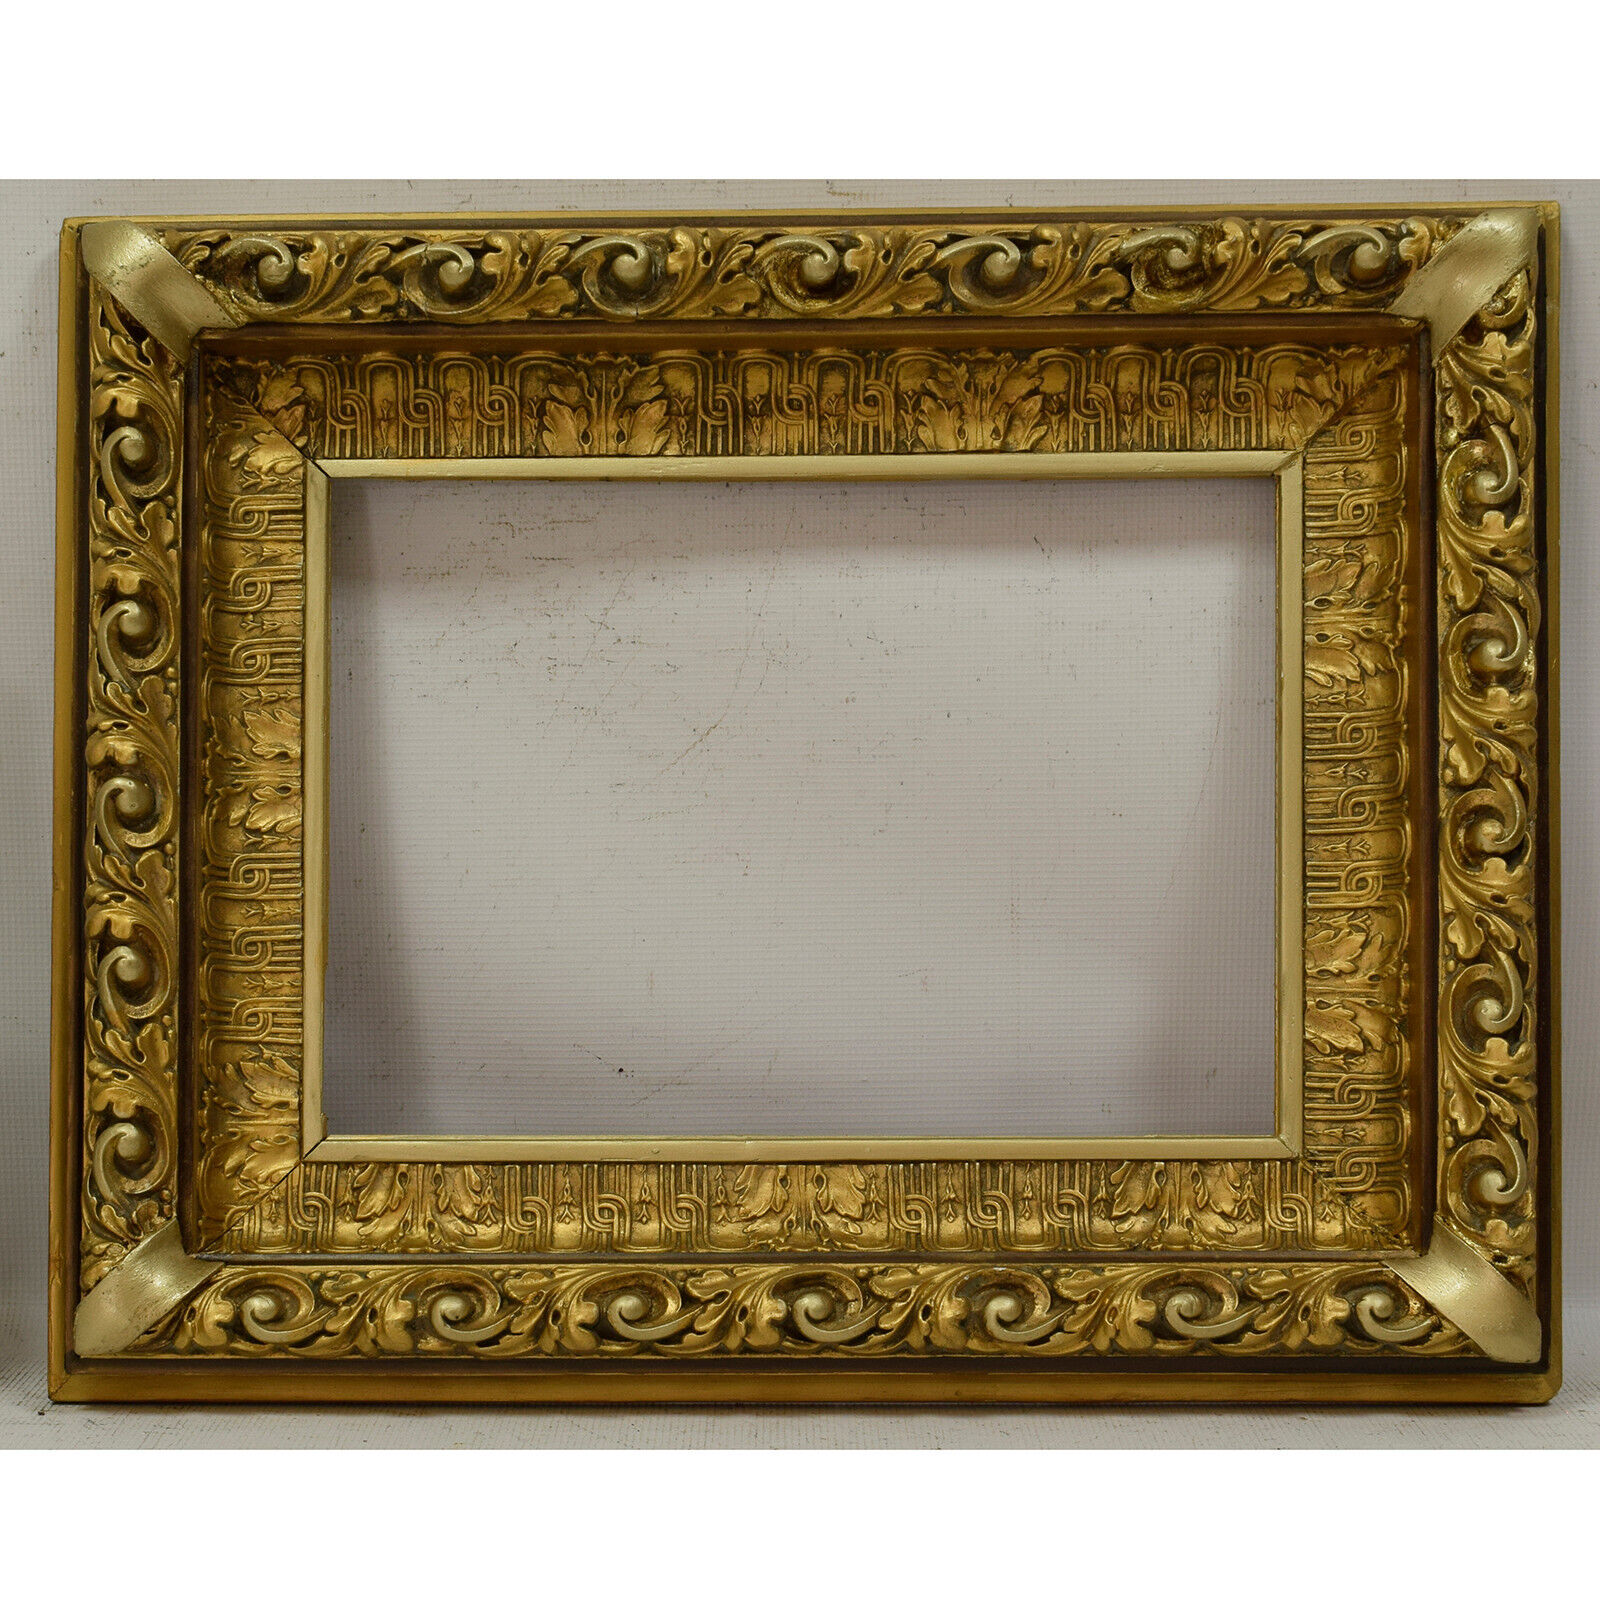 Ca1850-1900 Old wooden frame Original condition Internal: 16,1x12,2 in